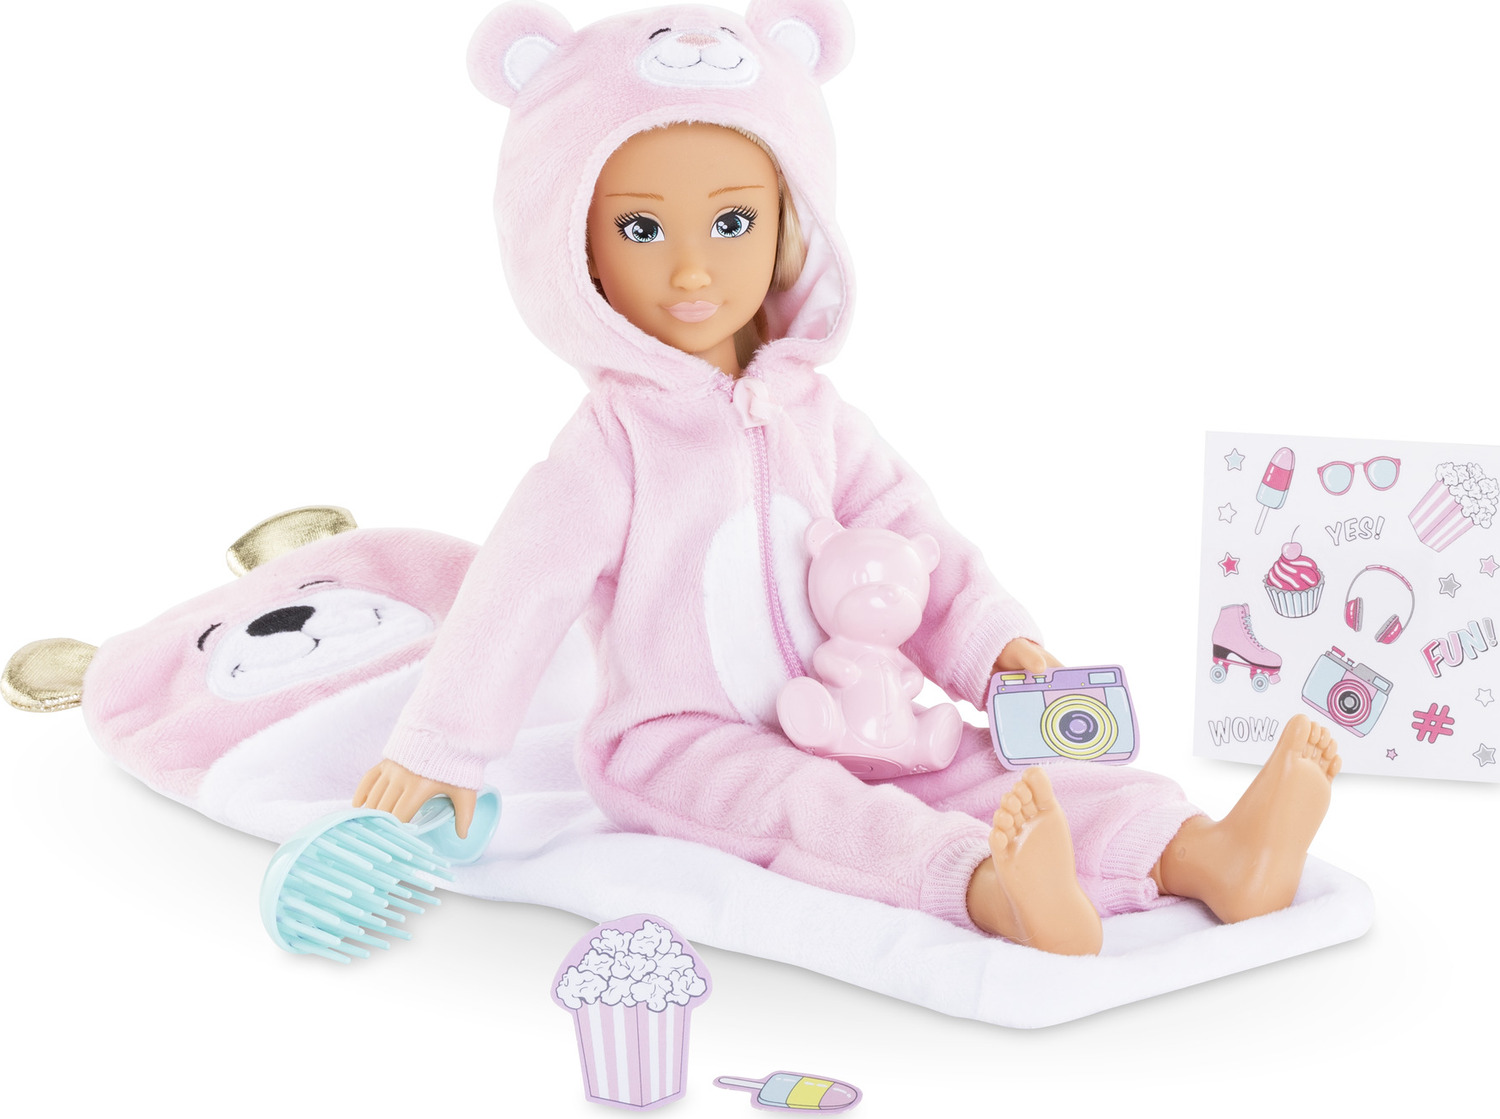 Corolle Girls Valentine Pajama Party Set - The Toy Box Hanover